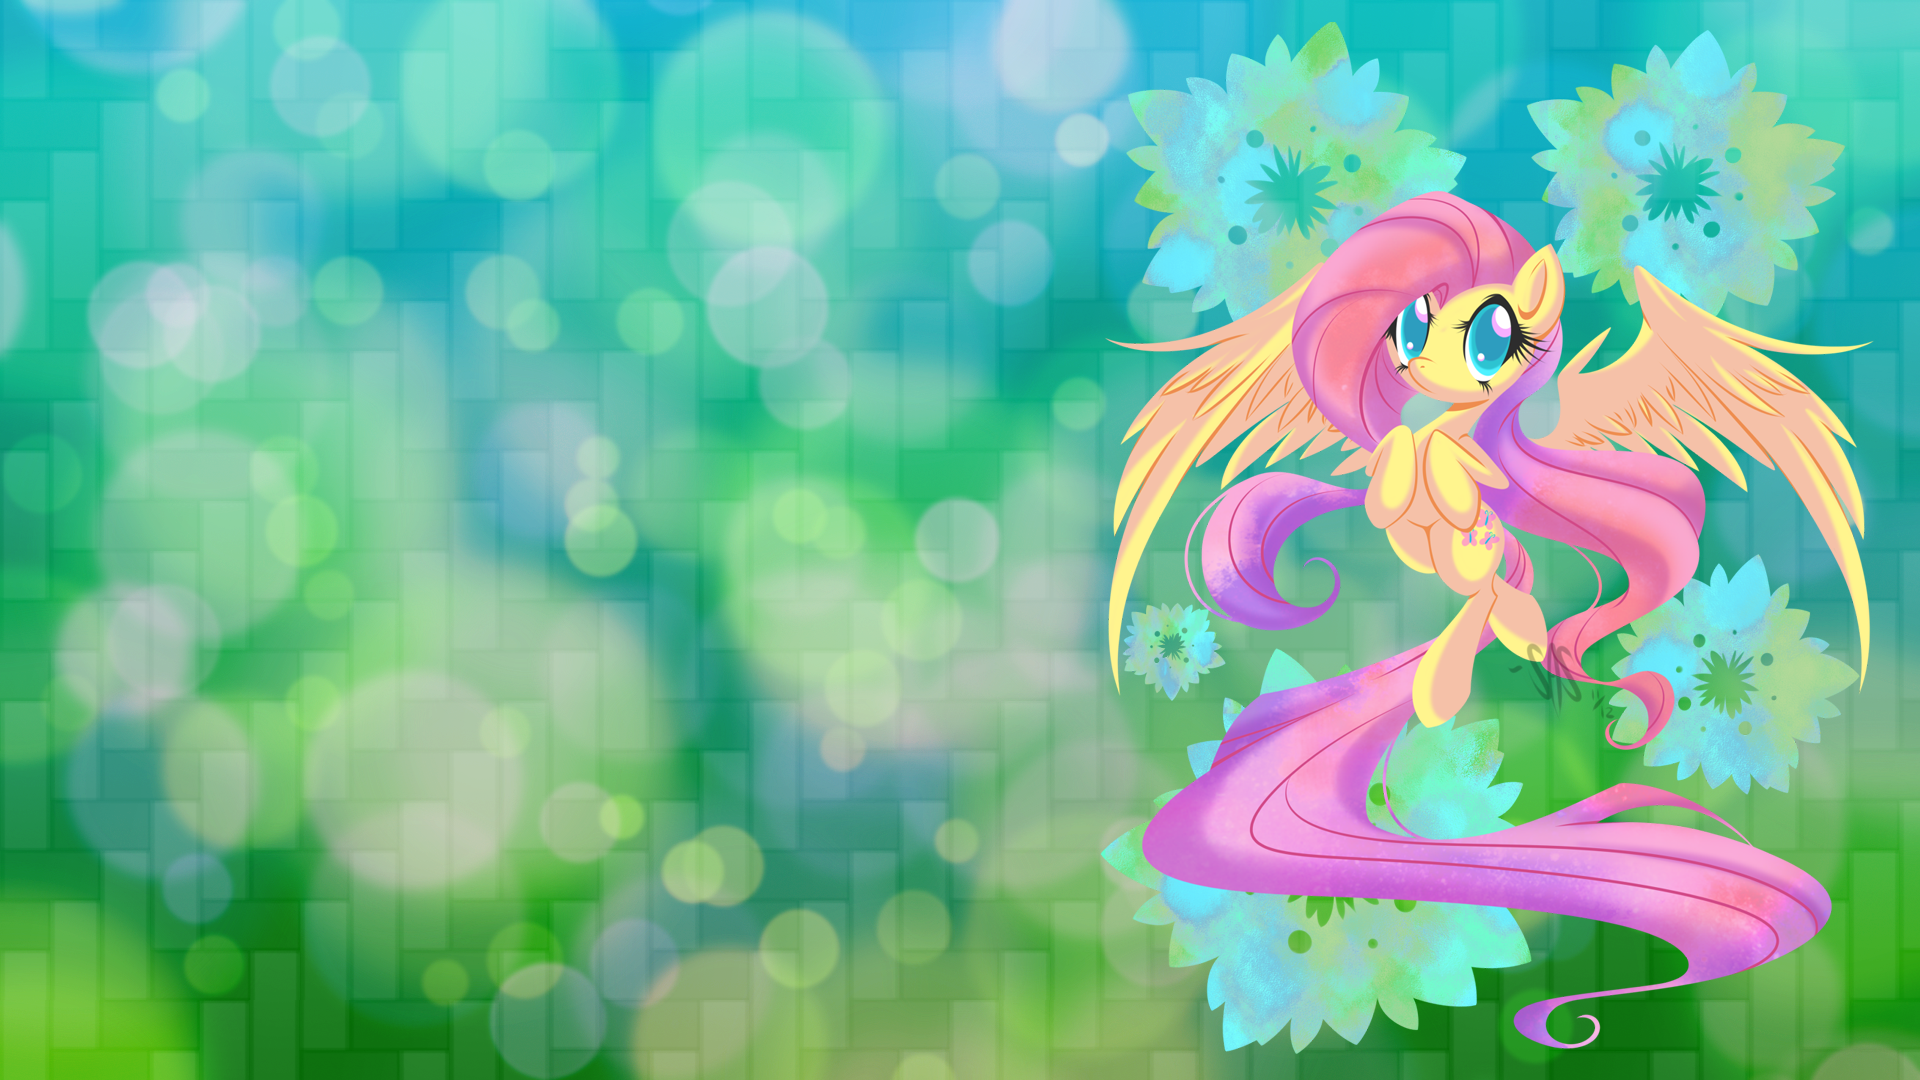 Beautiful Fluttershy Flowers Wallpaper by BambooDog and stewartisme